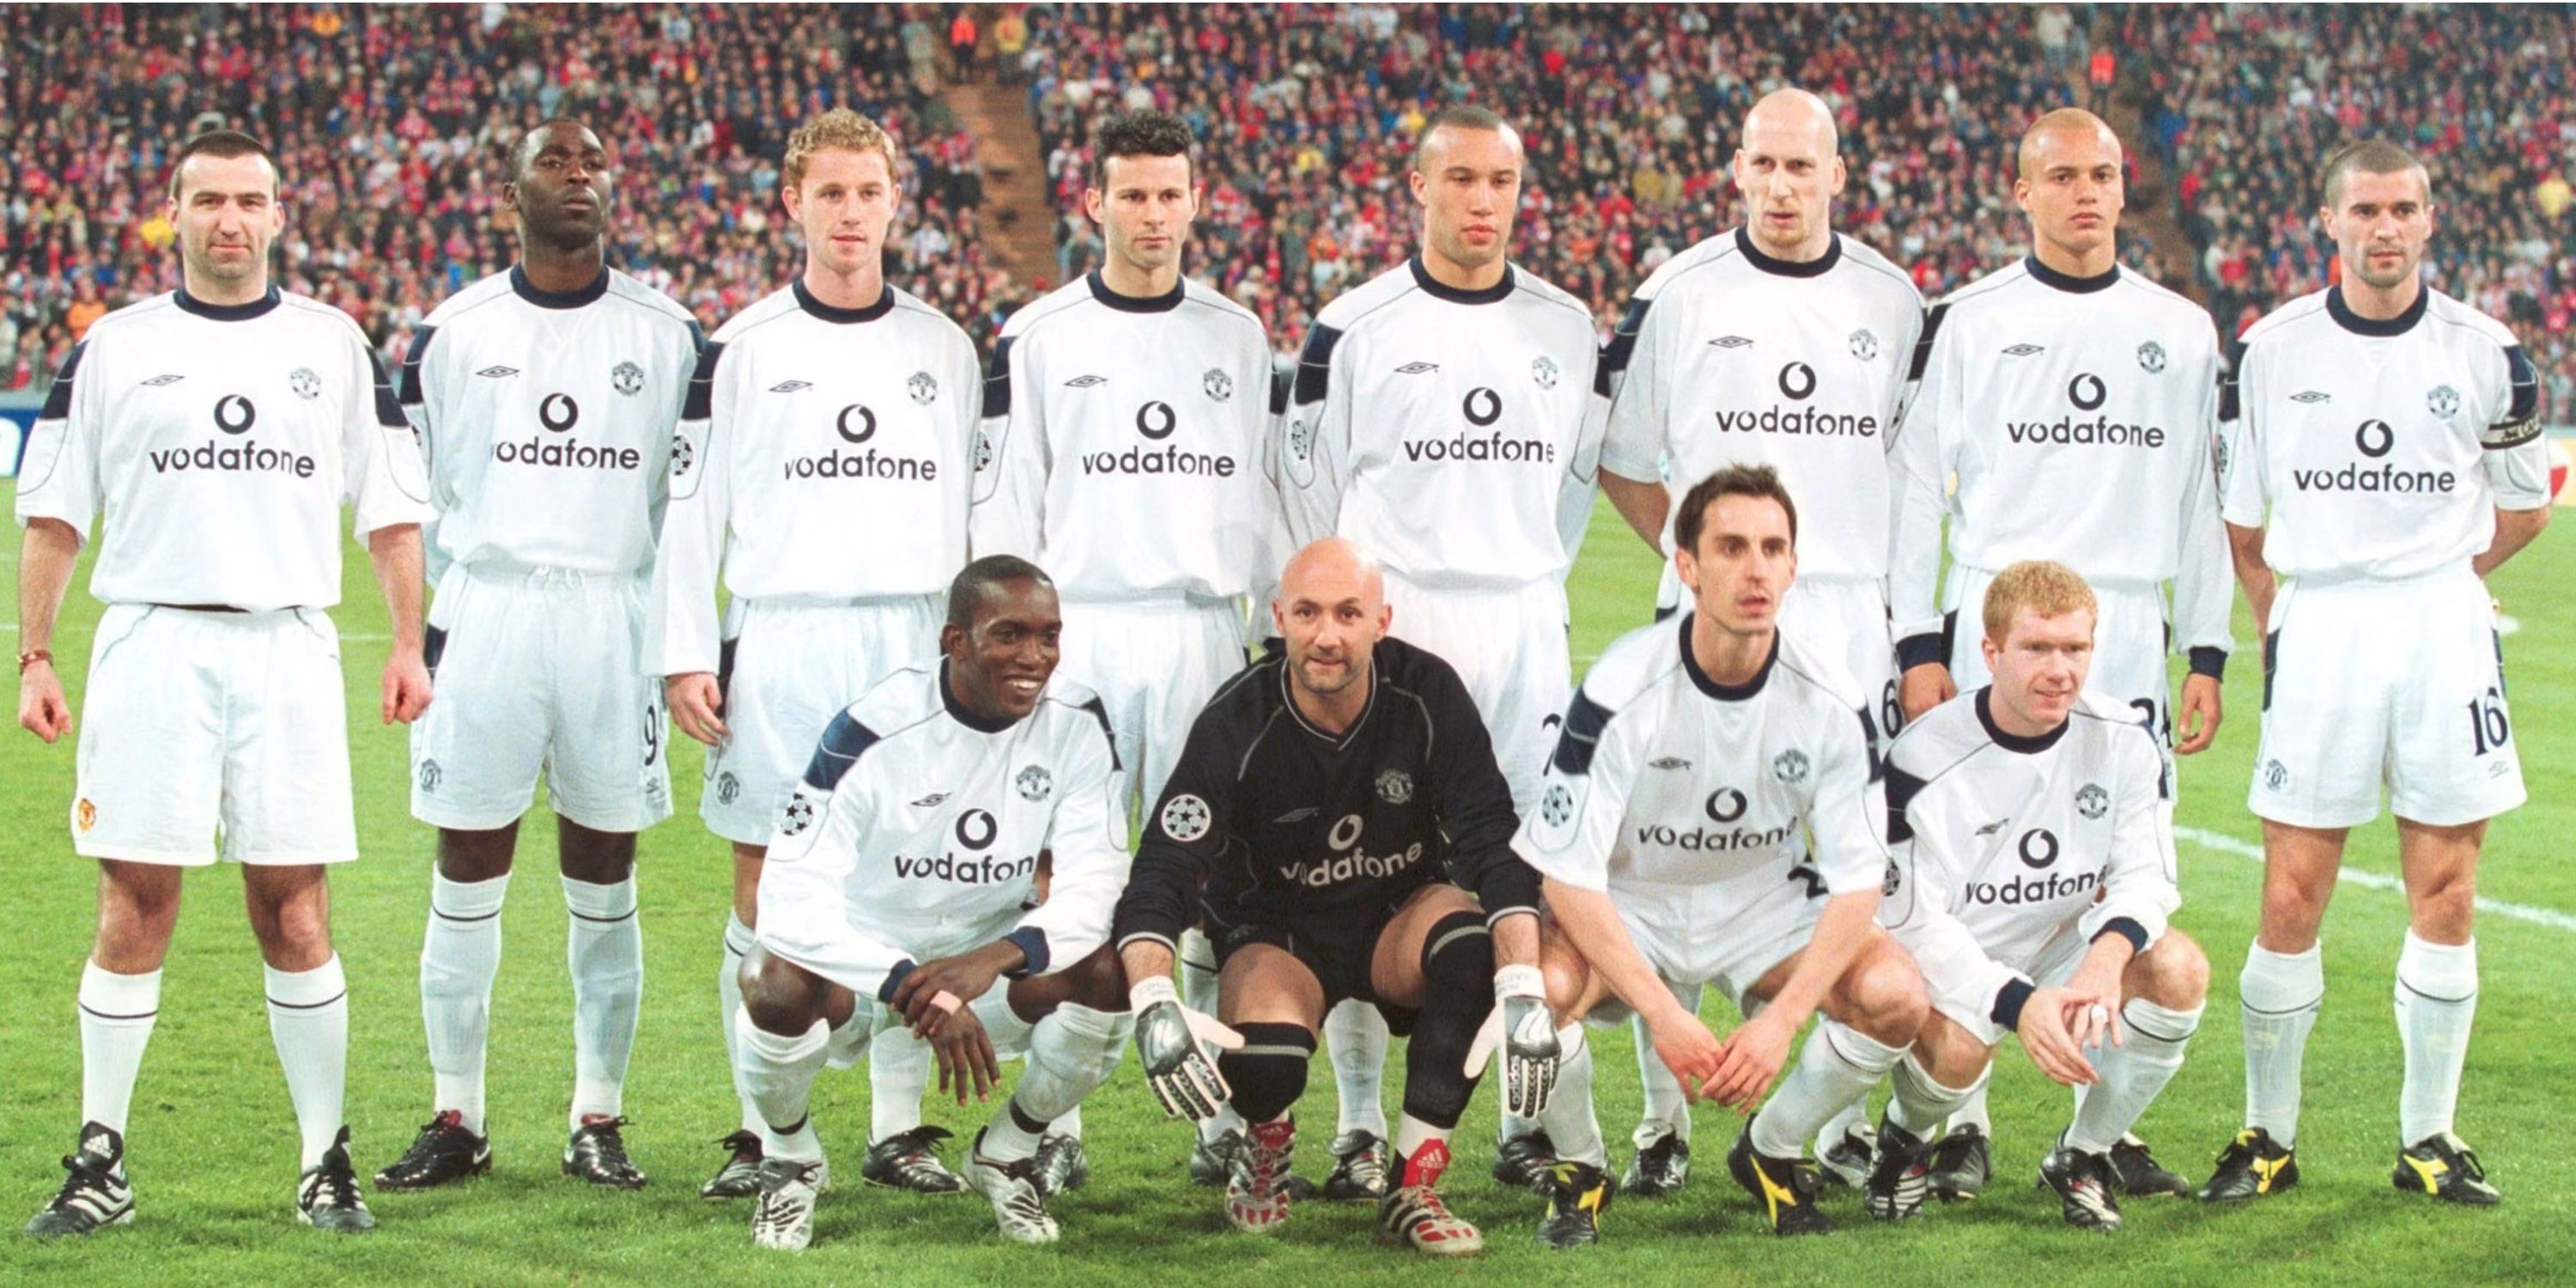 Man Utd fan Karl Power blagged his way into Champions League team photo in 2001